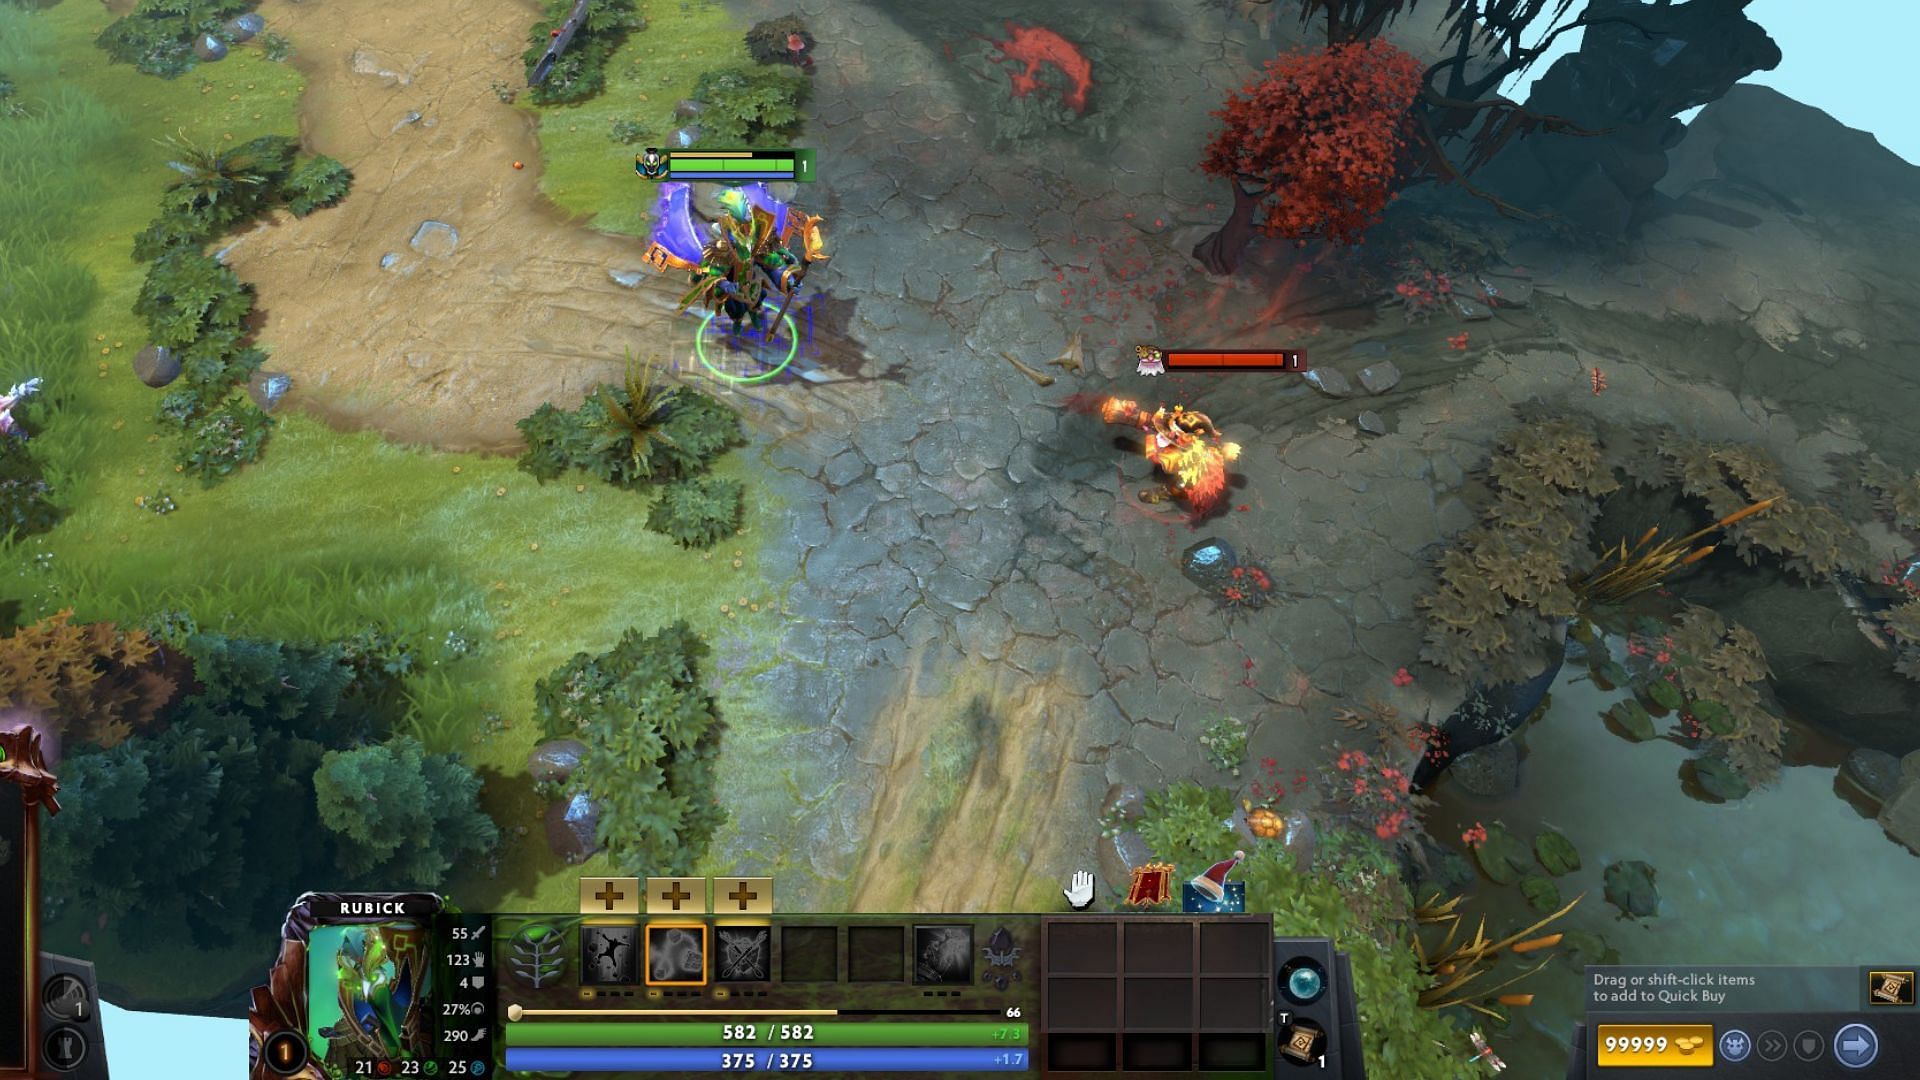 Rubick with Safety Bubble (Image via Steam Screenshot/Valve)